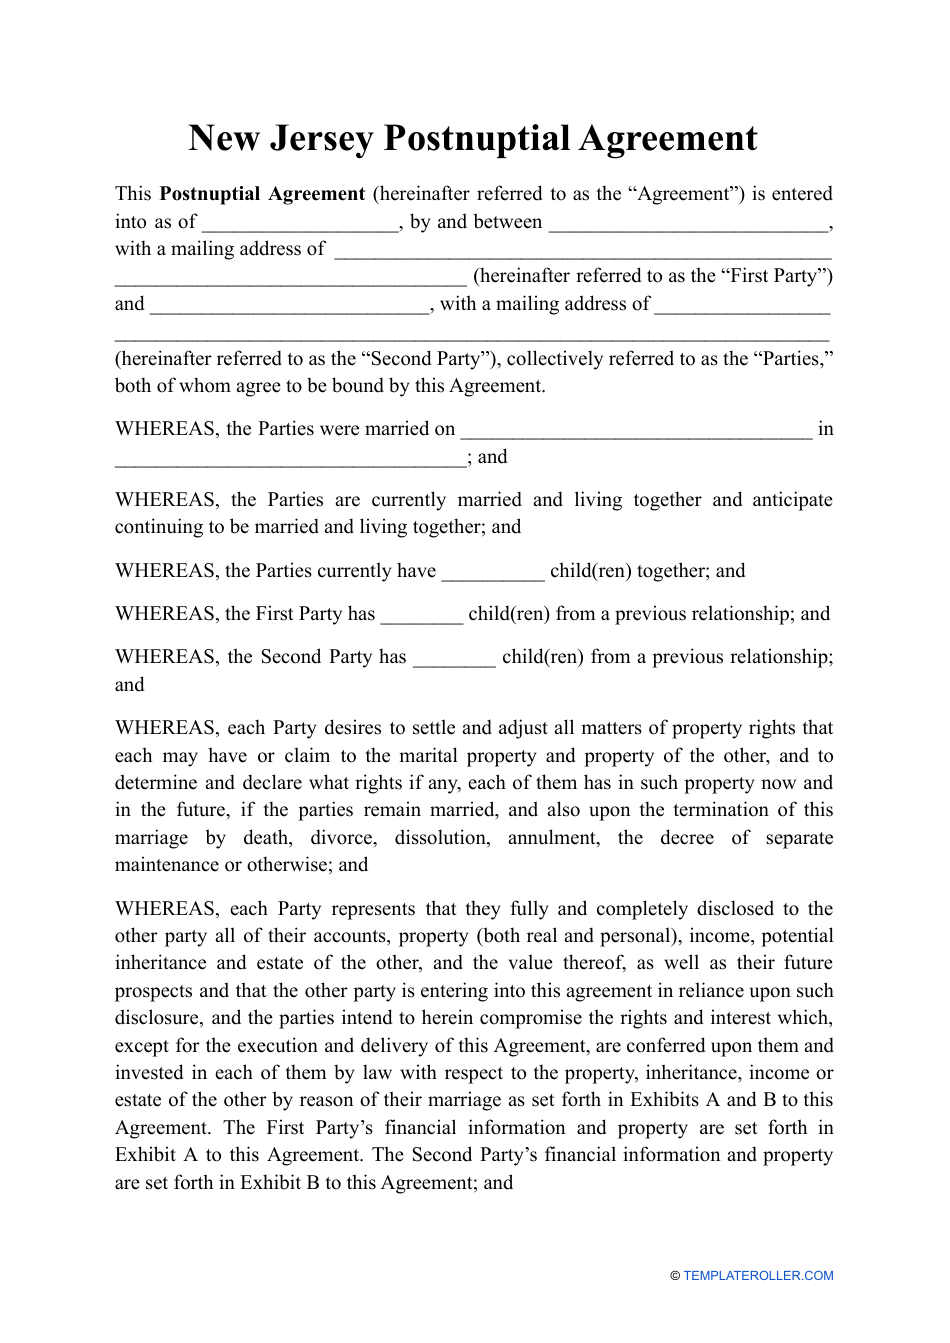 Postnuptial Agreement Template - New Jersey, Page 1